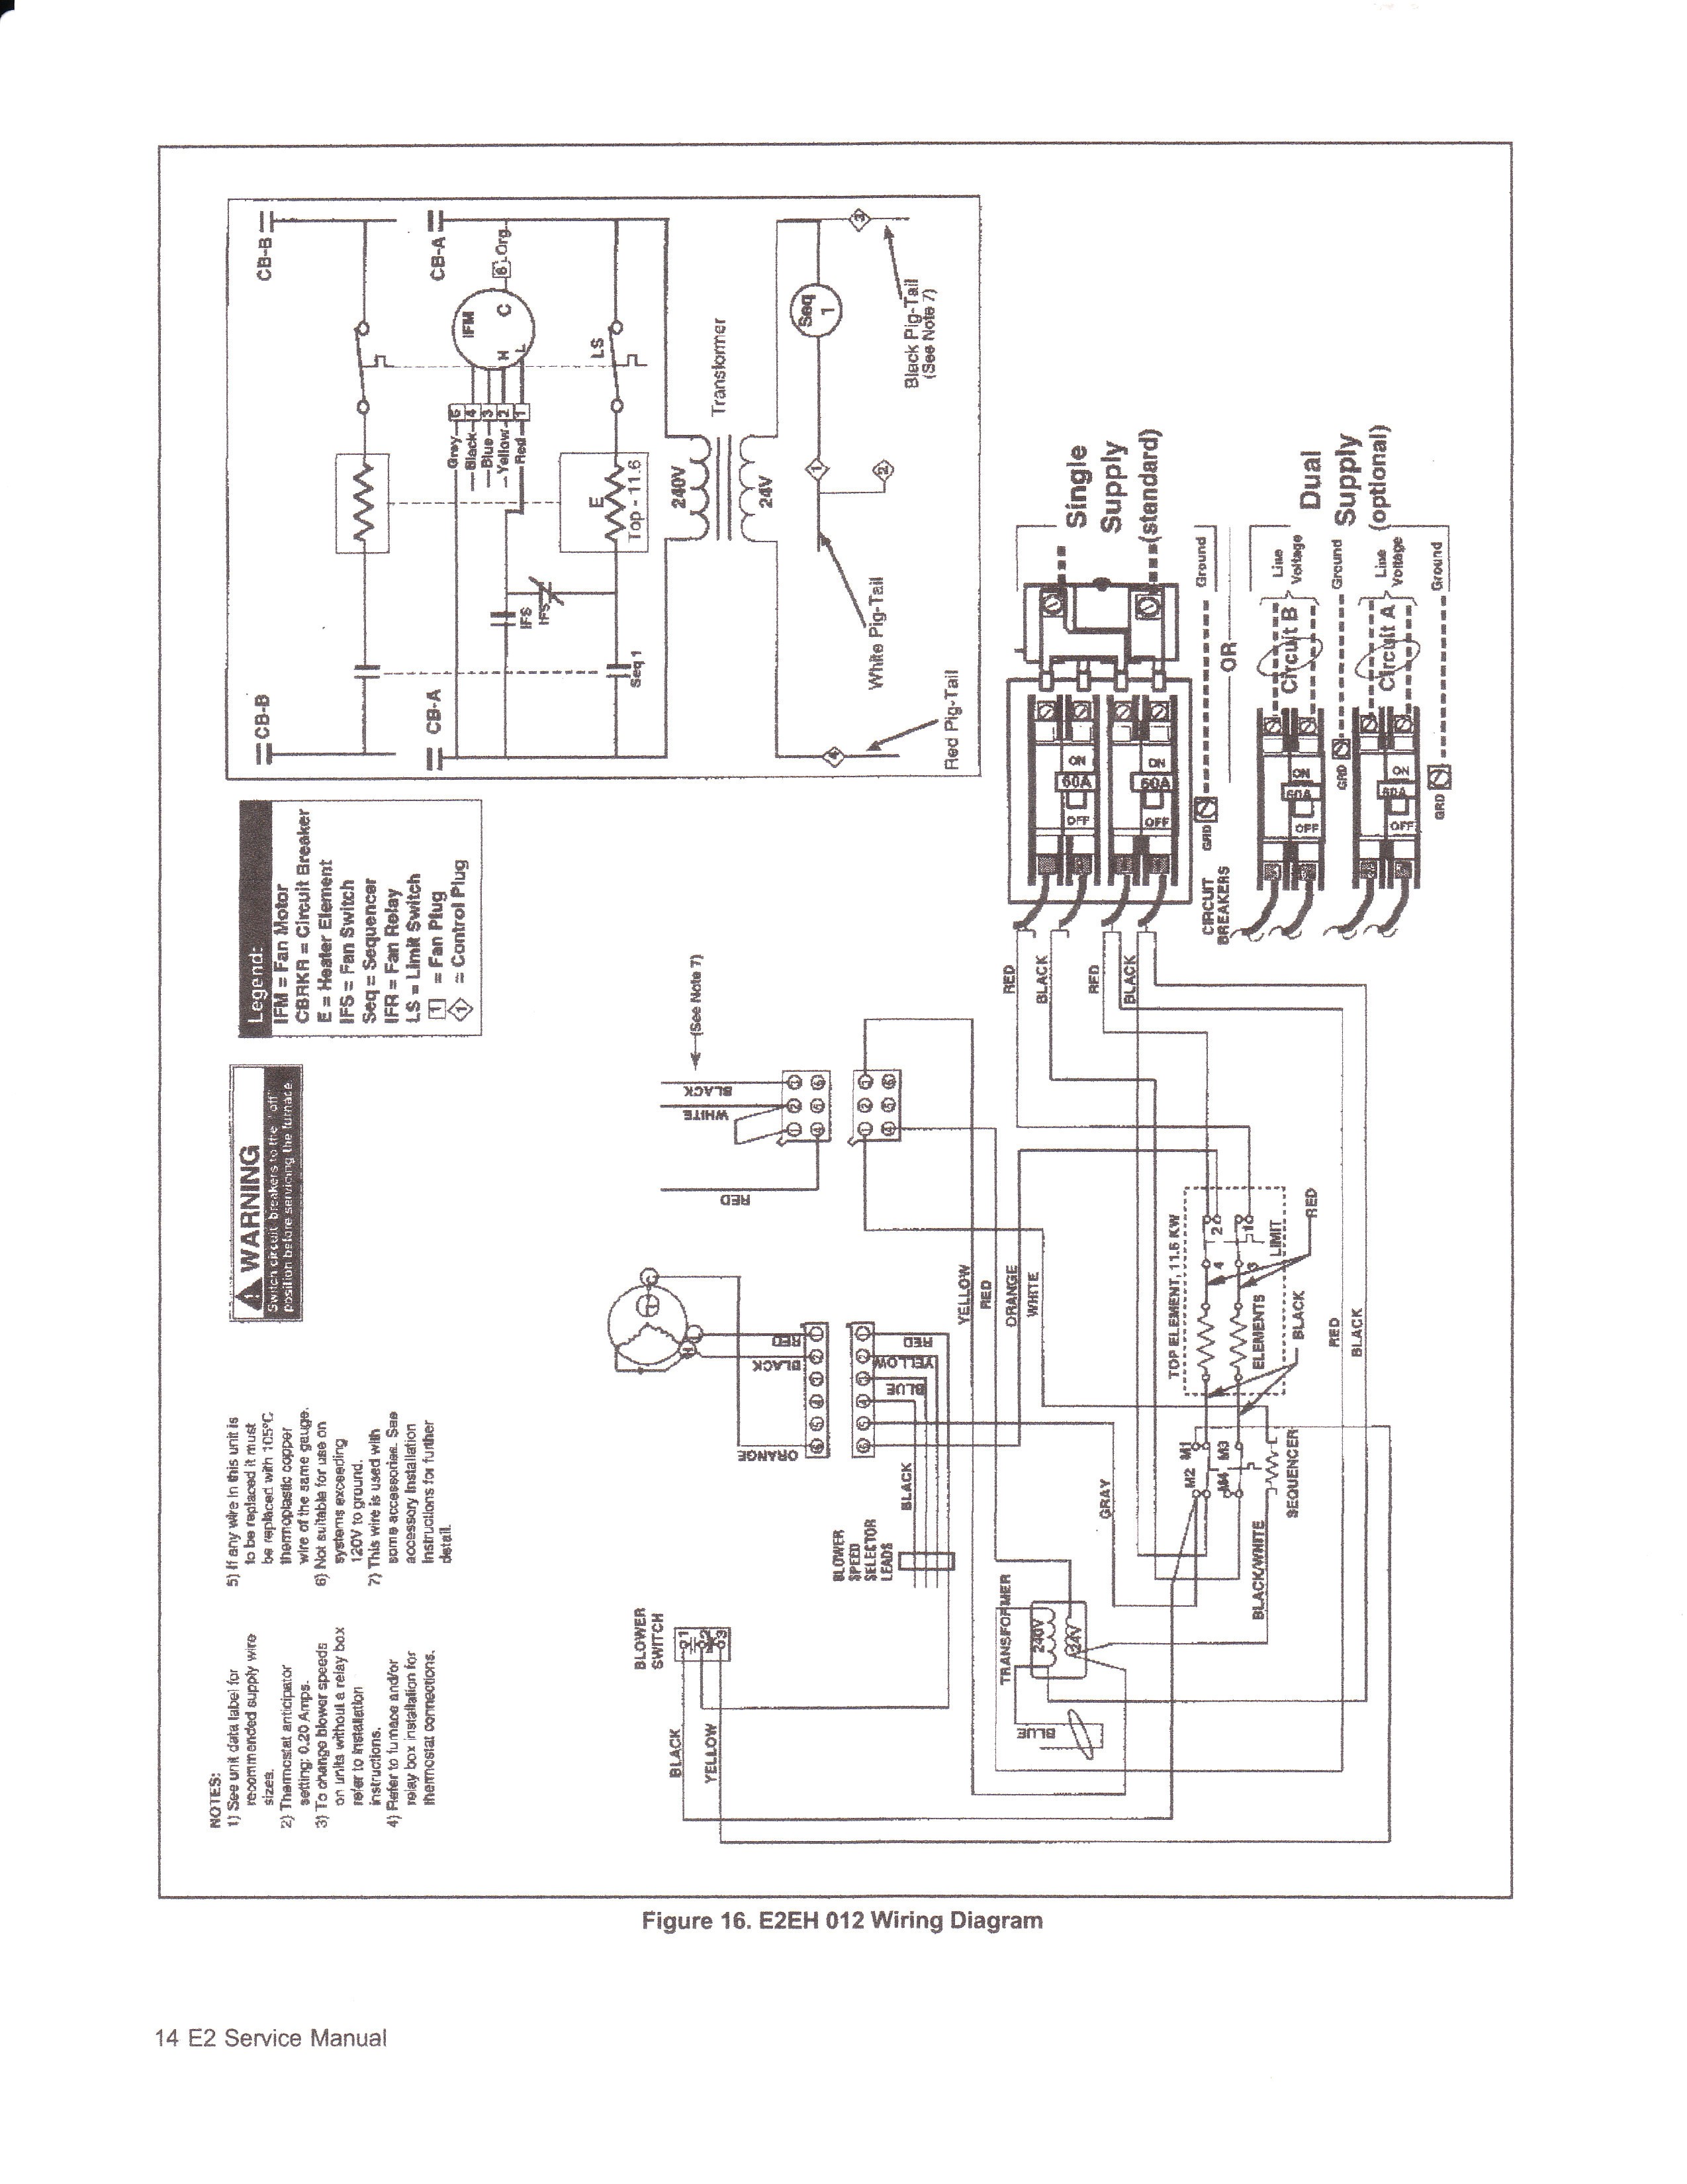 Wiring Diagram for A Gas Furnace Fresh Mobile Home Coleman Gas Furnace Wiring Diagram Mobile Home